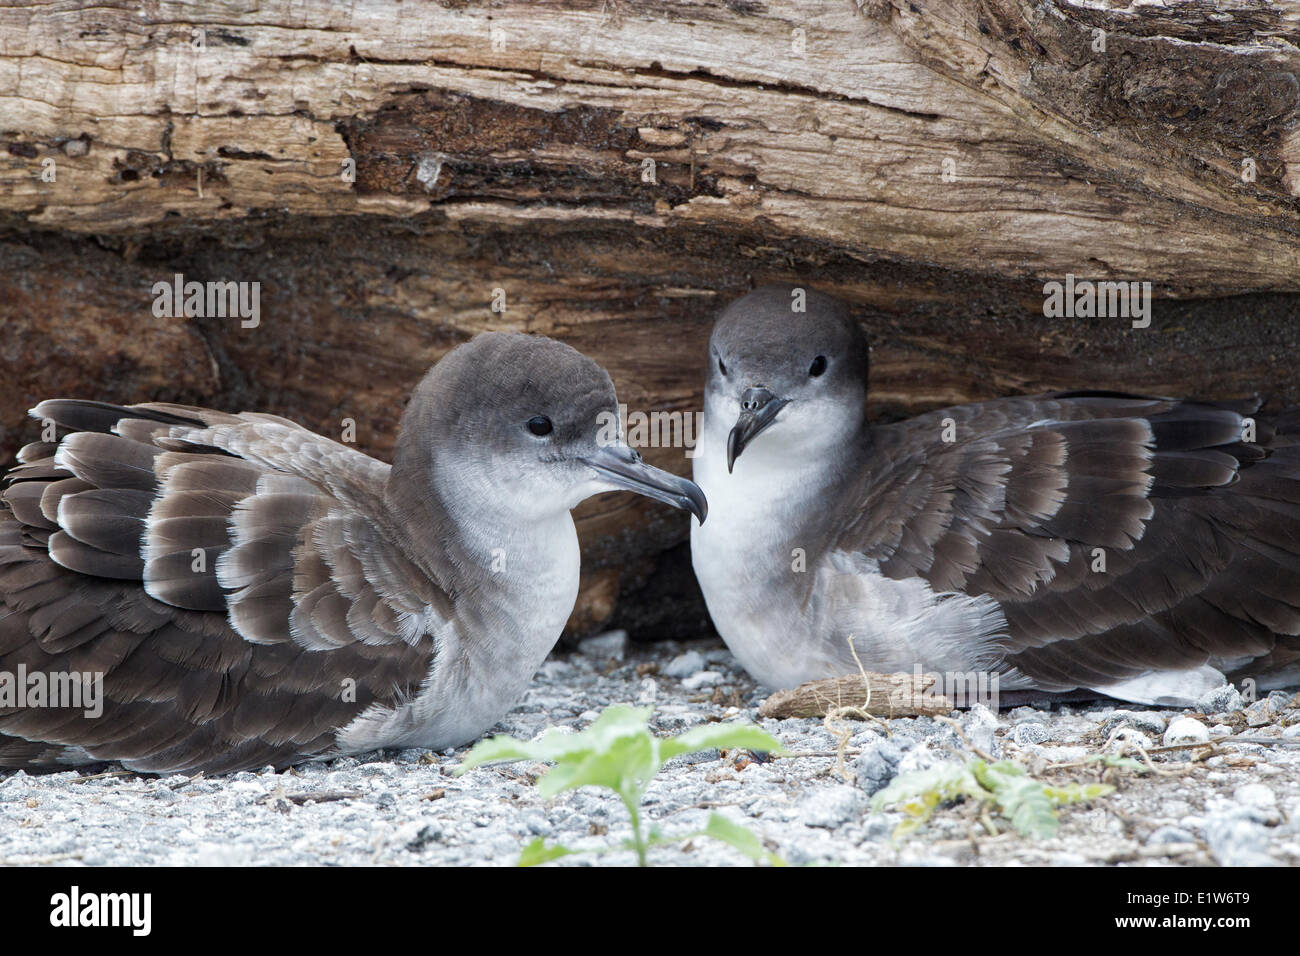 Cuneo-tailed shearwater (Puffinus pacificus chlororhynchus) coppia Isola Orientale atollo di Midway National Wildlife Refuge Northwest Foto Stock